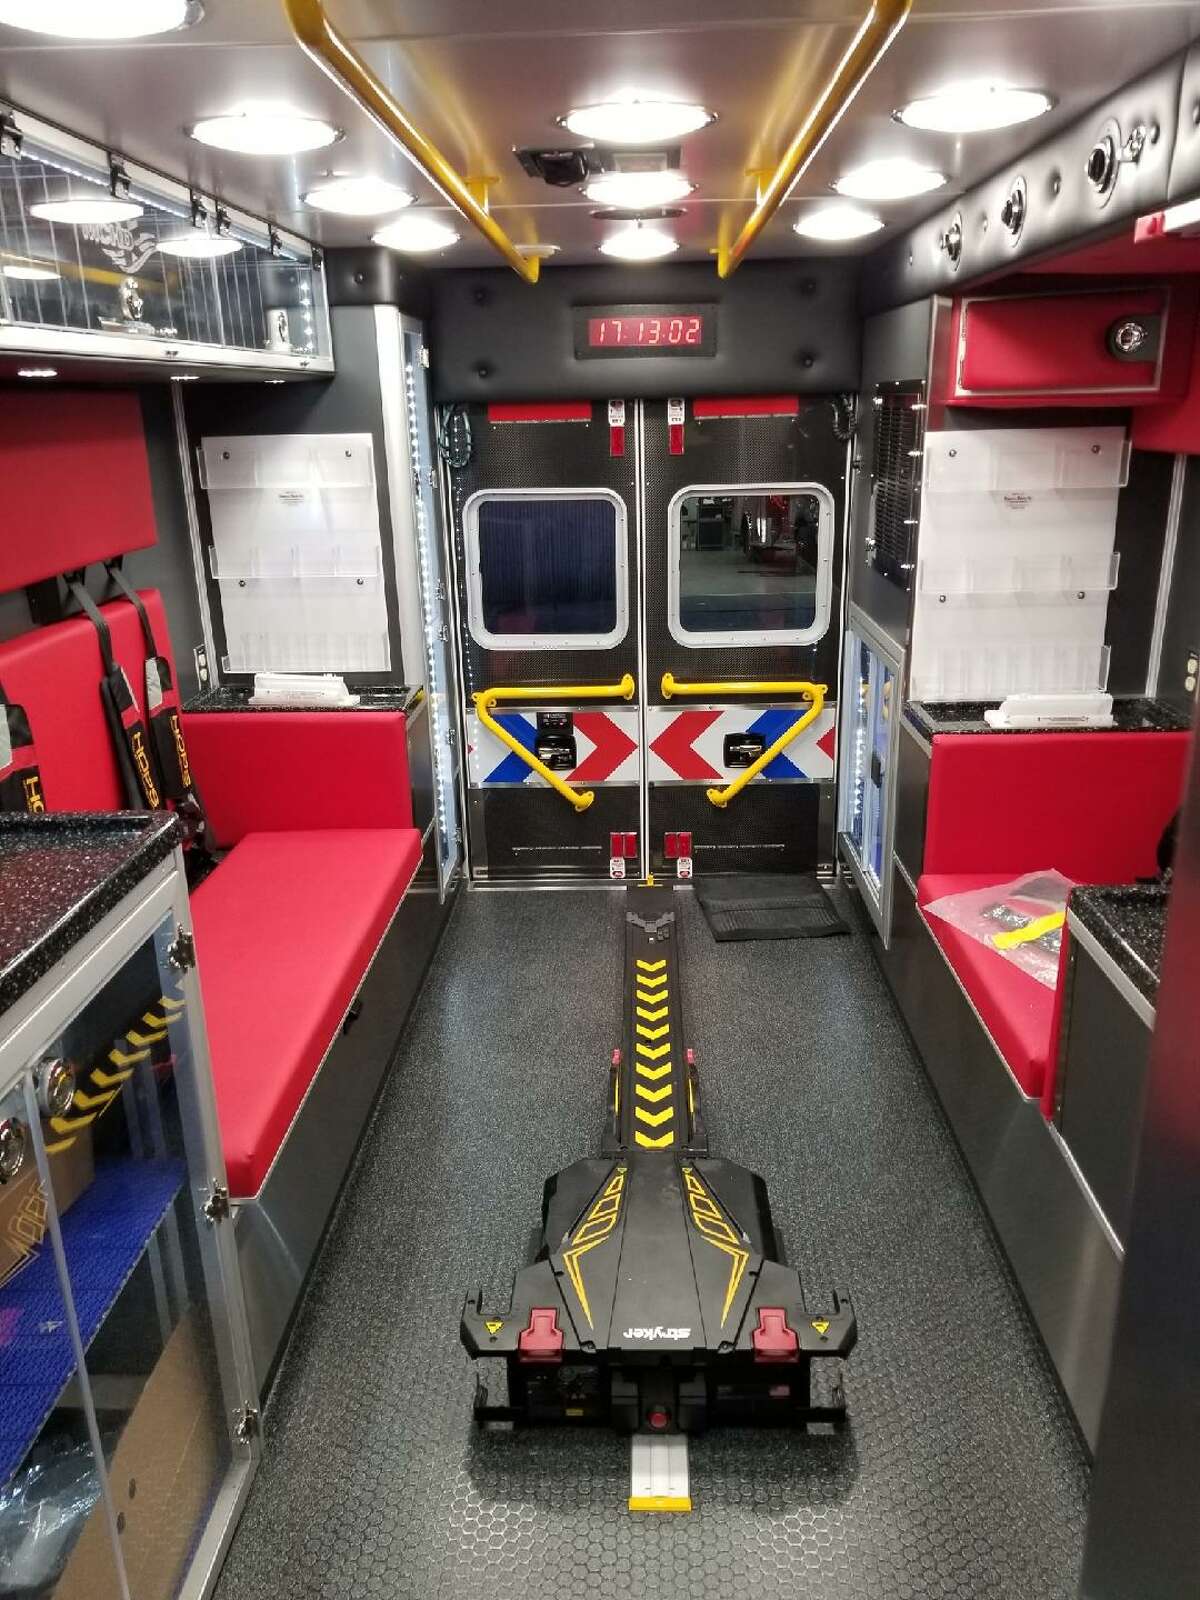 The plan comes on the heels of a greater push for paramedic and patient safety within the fleet, Cosper said. In late 2017, paramedics Megan DeAnna and Megan Sofka came across a Horton-built ambulance at the Texas EMS Conference and approached him to explore replacing their current aging ambulances.